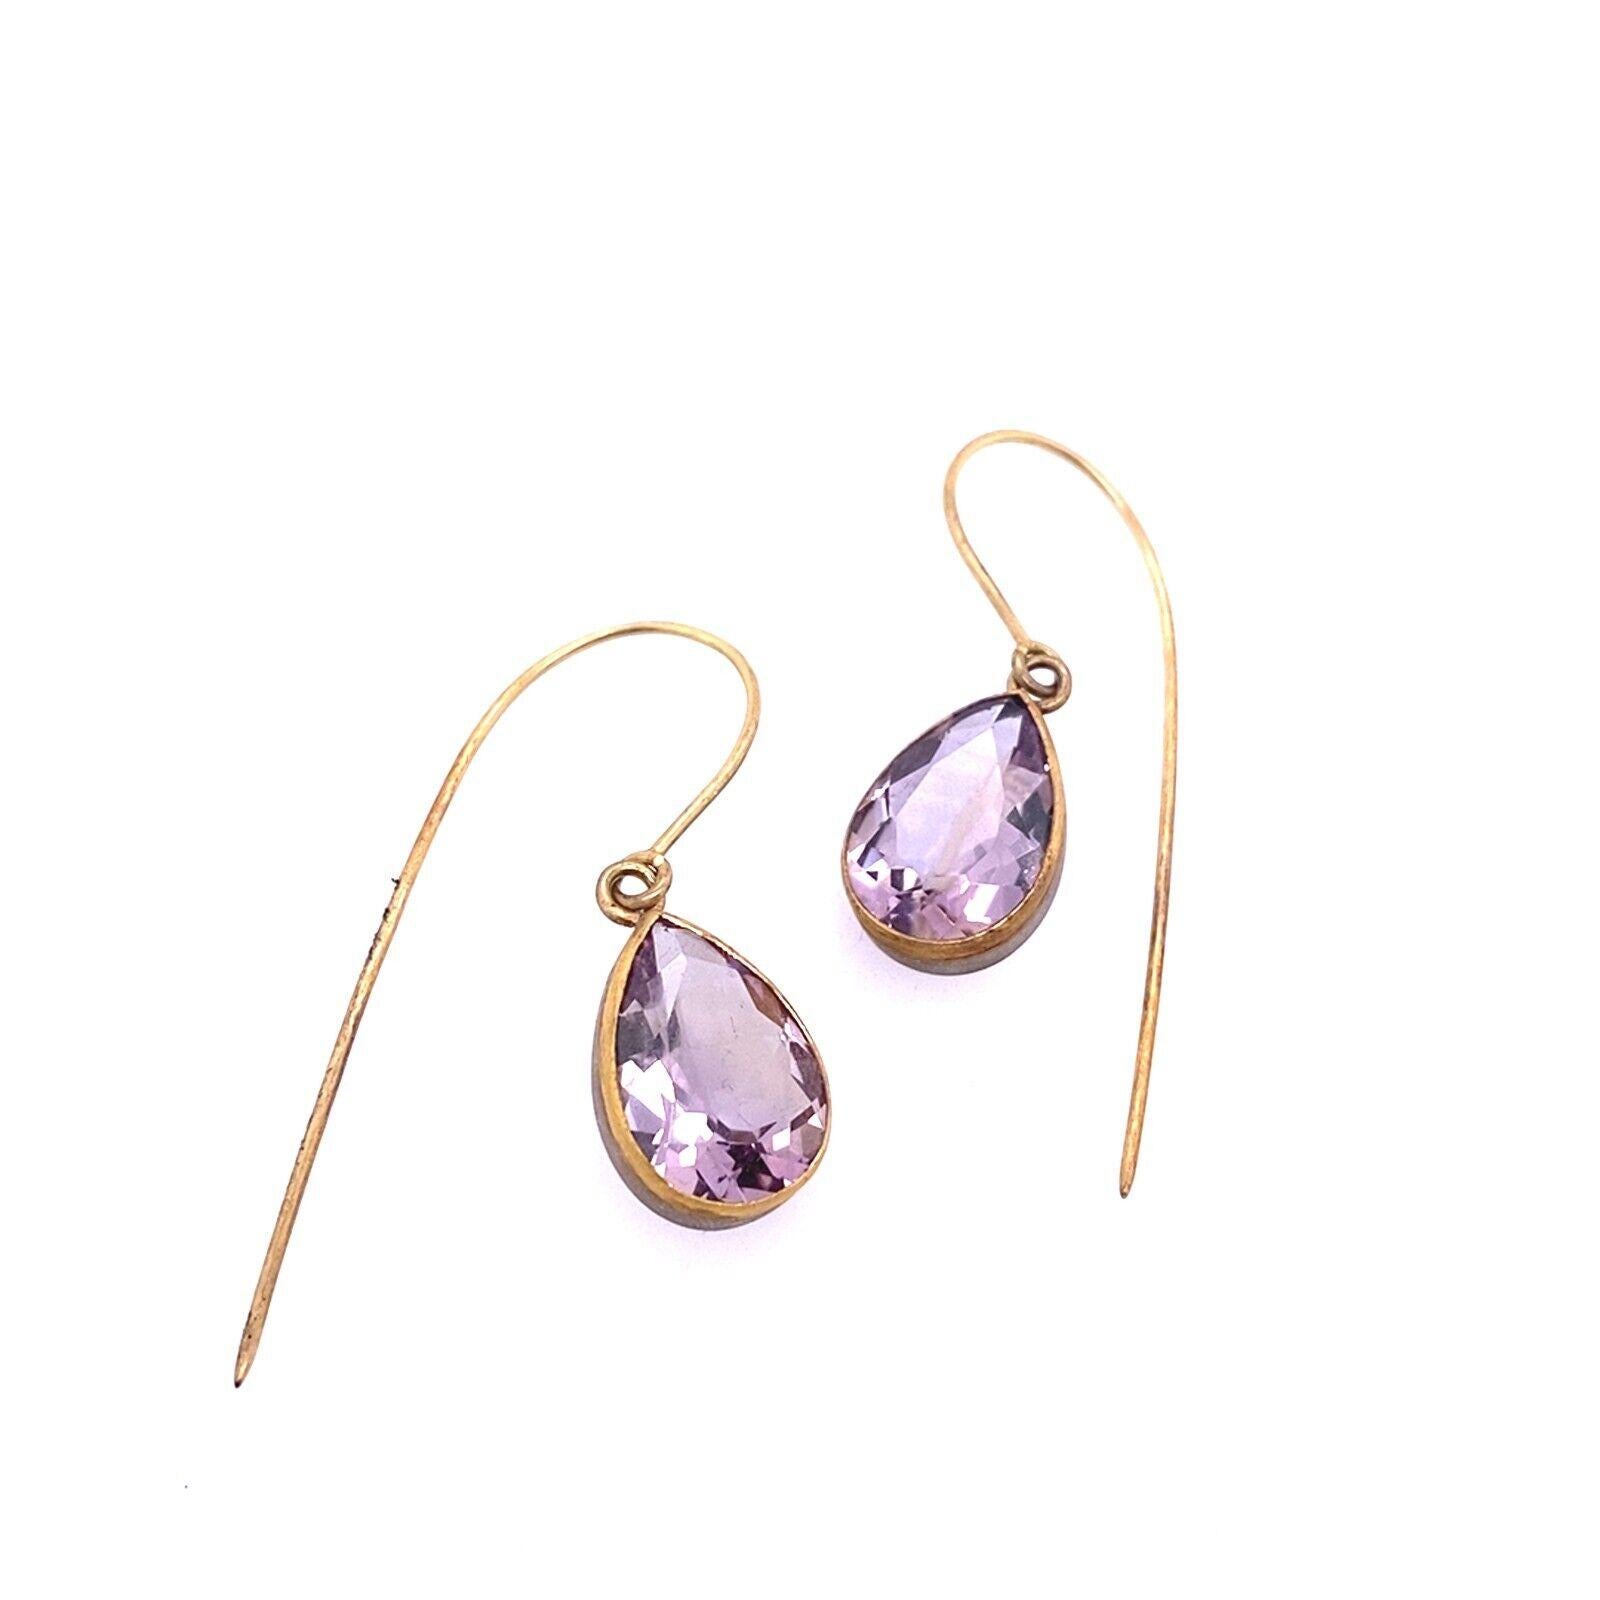 Handmade 18ct Yellow Gold & Silver Large Amethyst Drop Earrings

These gorgeous handmade 18ct Yellow Gold & Silver drop earrings are set with a large Amethyst gemstone

Additional Information: 
Total Gemstone Weight: 10.0ct approximately
Total